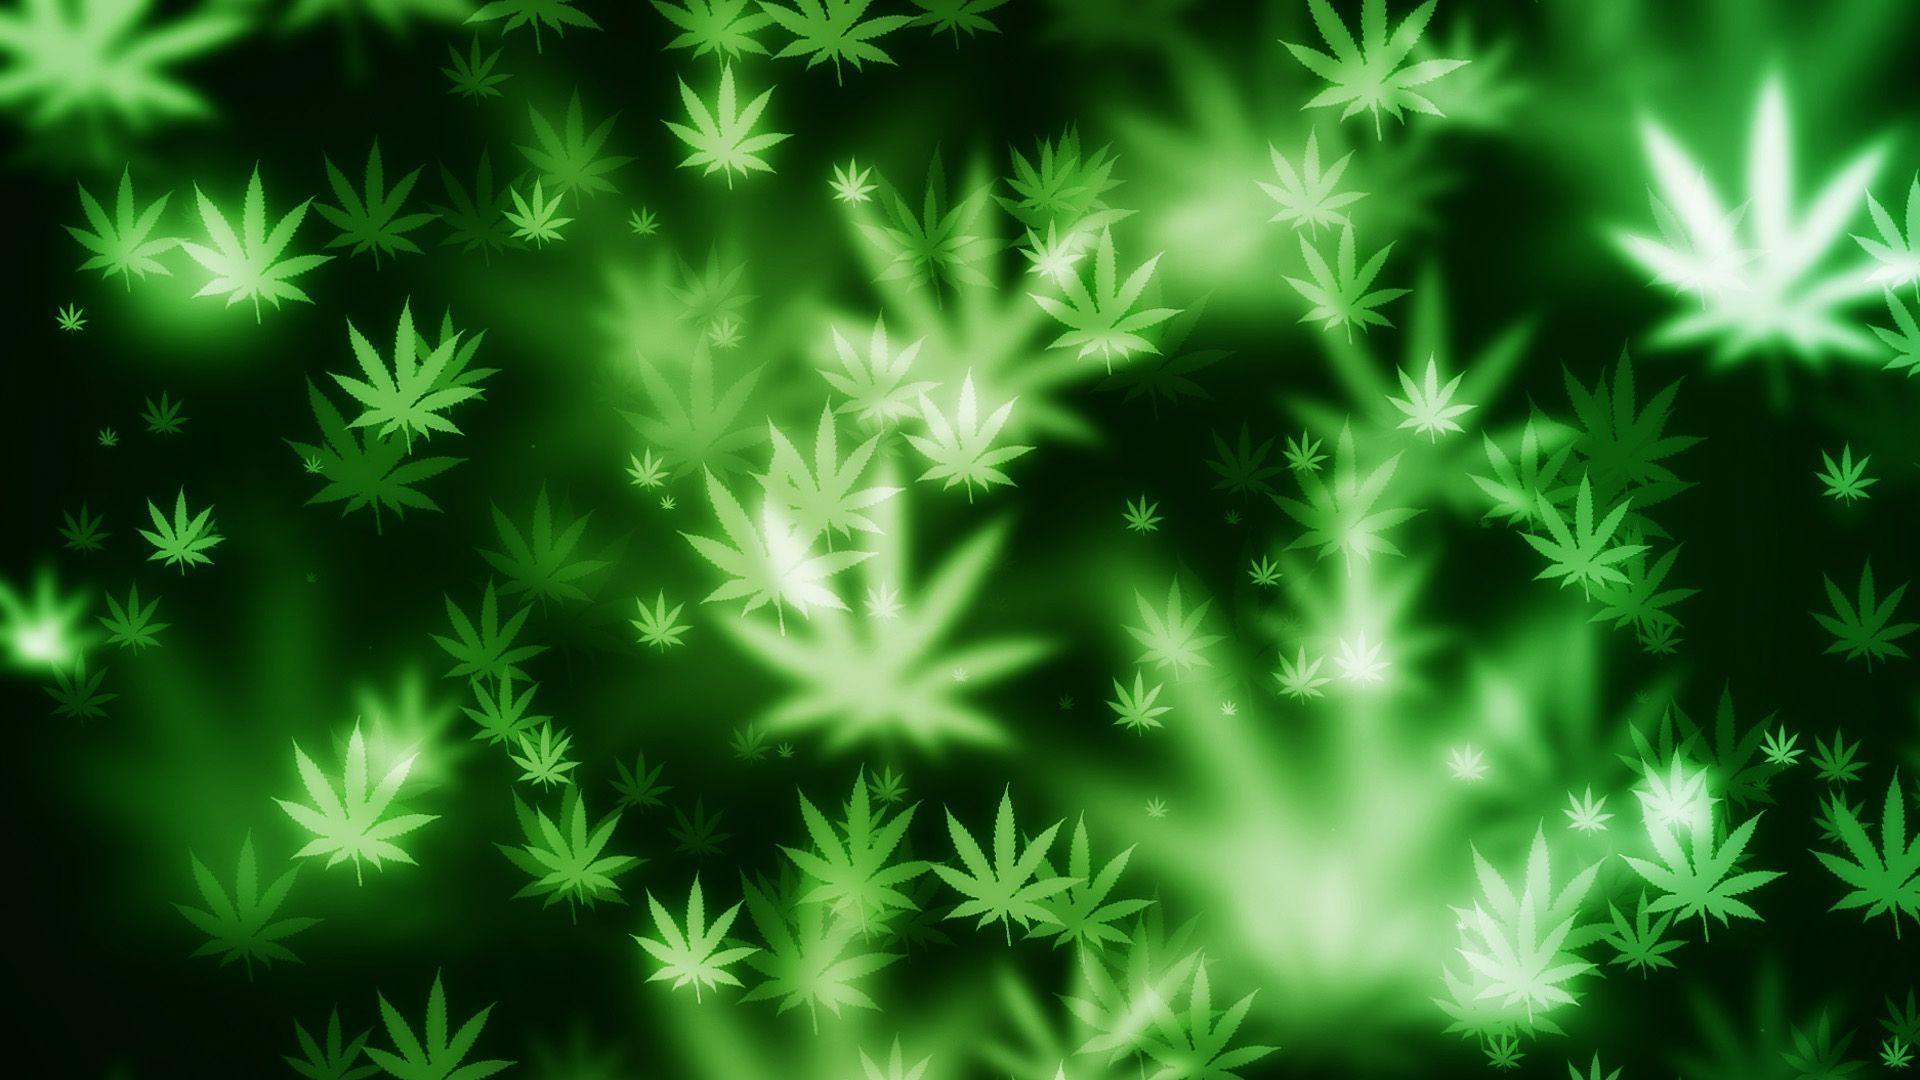 Wallpaper For > Weed Background For Facebook